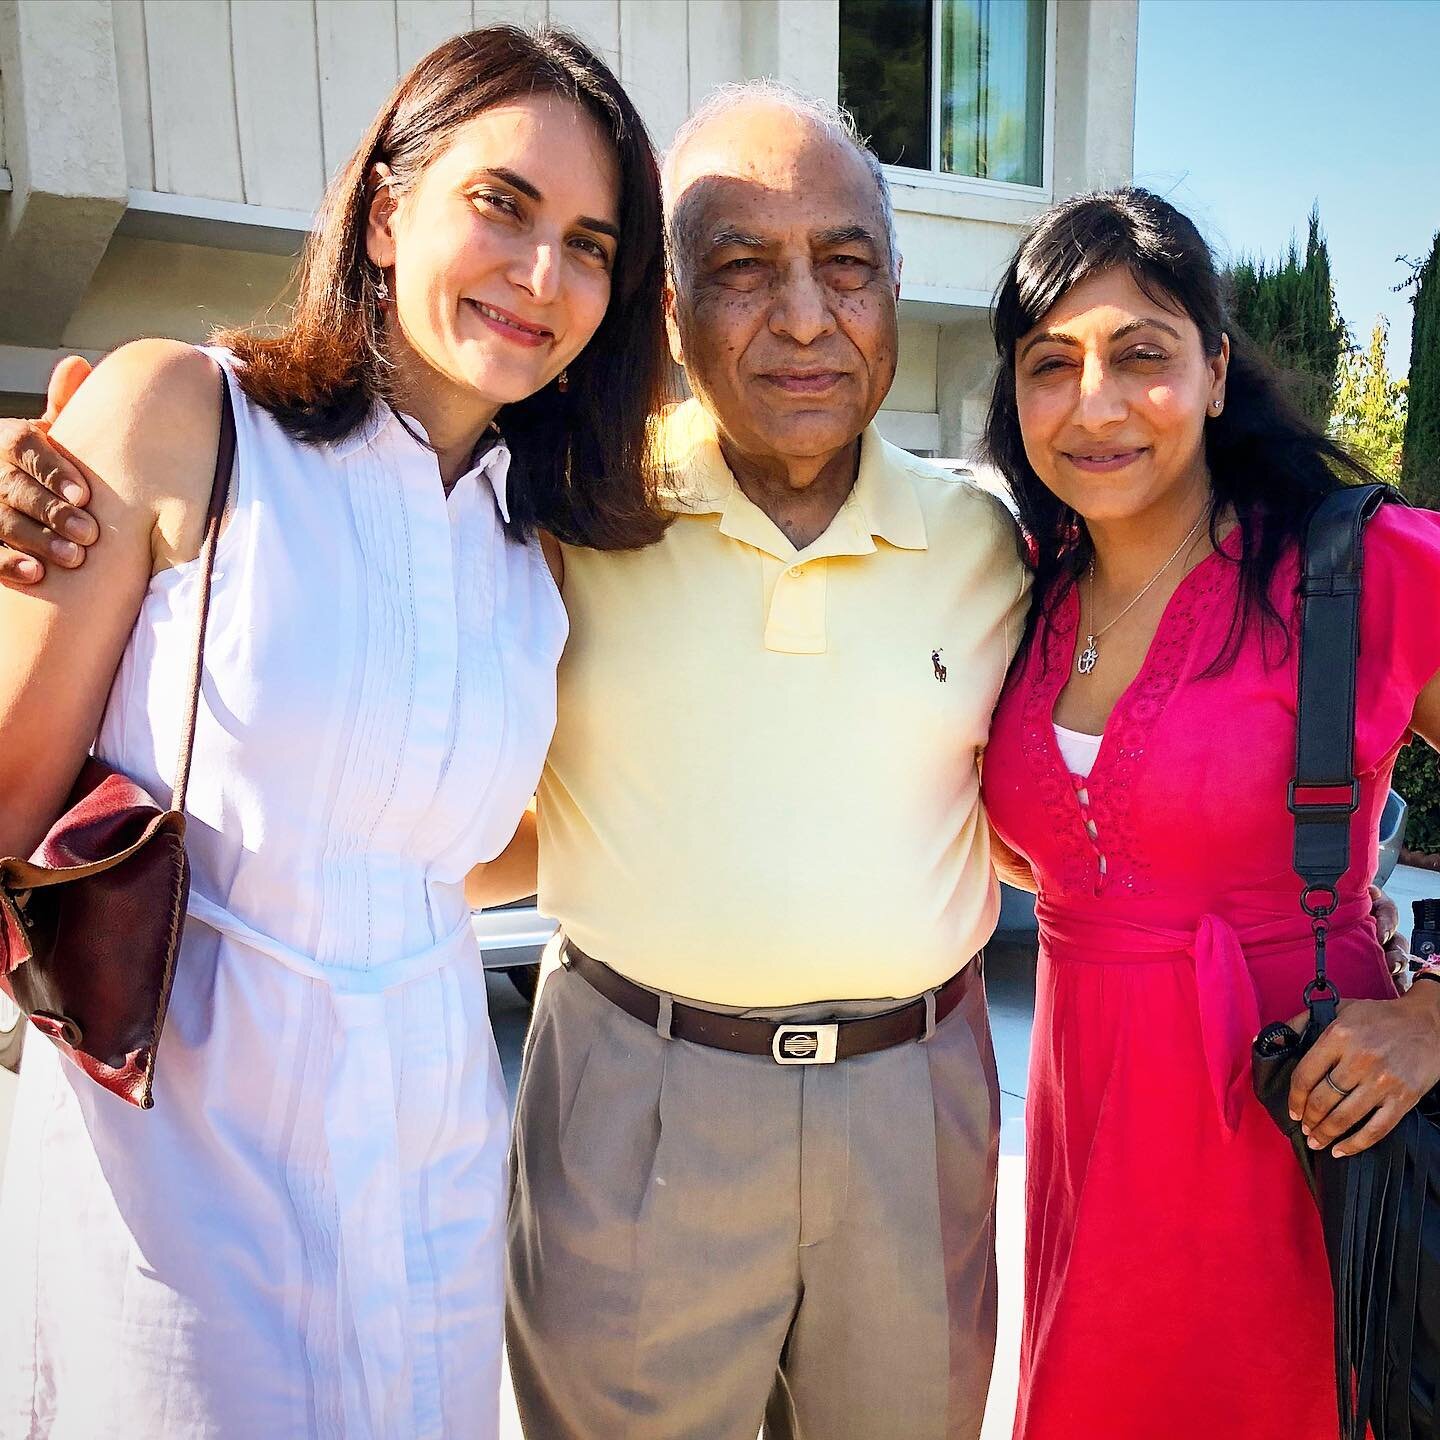 Mamaji - (noun) an Uncle, specifically a mother&rsquo;s brother, in Hindi. 
This is me and my cousin with our uncle. My Mamaji. Behind us, his home on a hill. This was the central meeting place for all of us cousins. We all grew up here, this home on